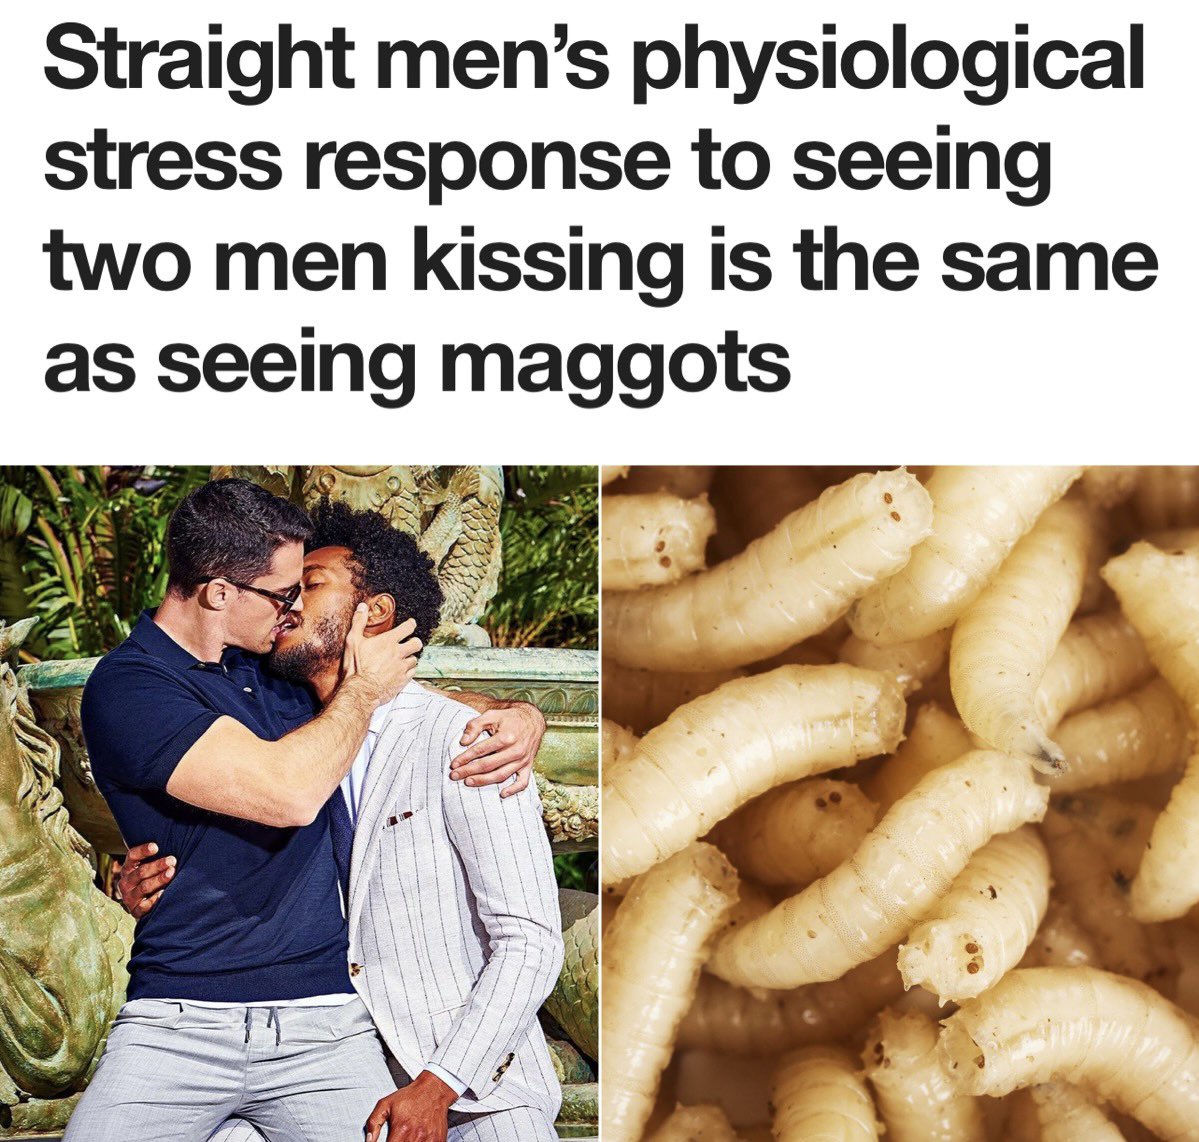 Advertising studies show that progressive and homosexual advertising causes the stress response in the brain to react in the same way that it would if someone were to be looking at maggots. 

However, presently, the push for “inclusive” and tolerant advertising has been more…